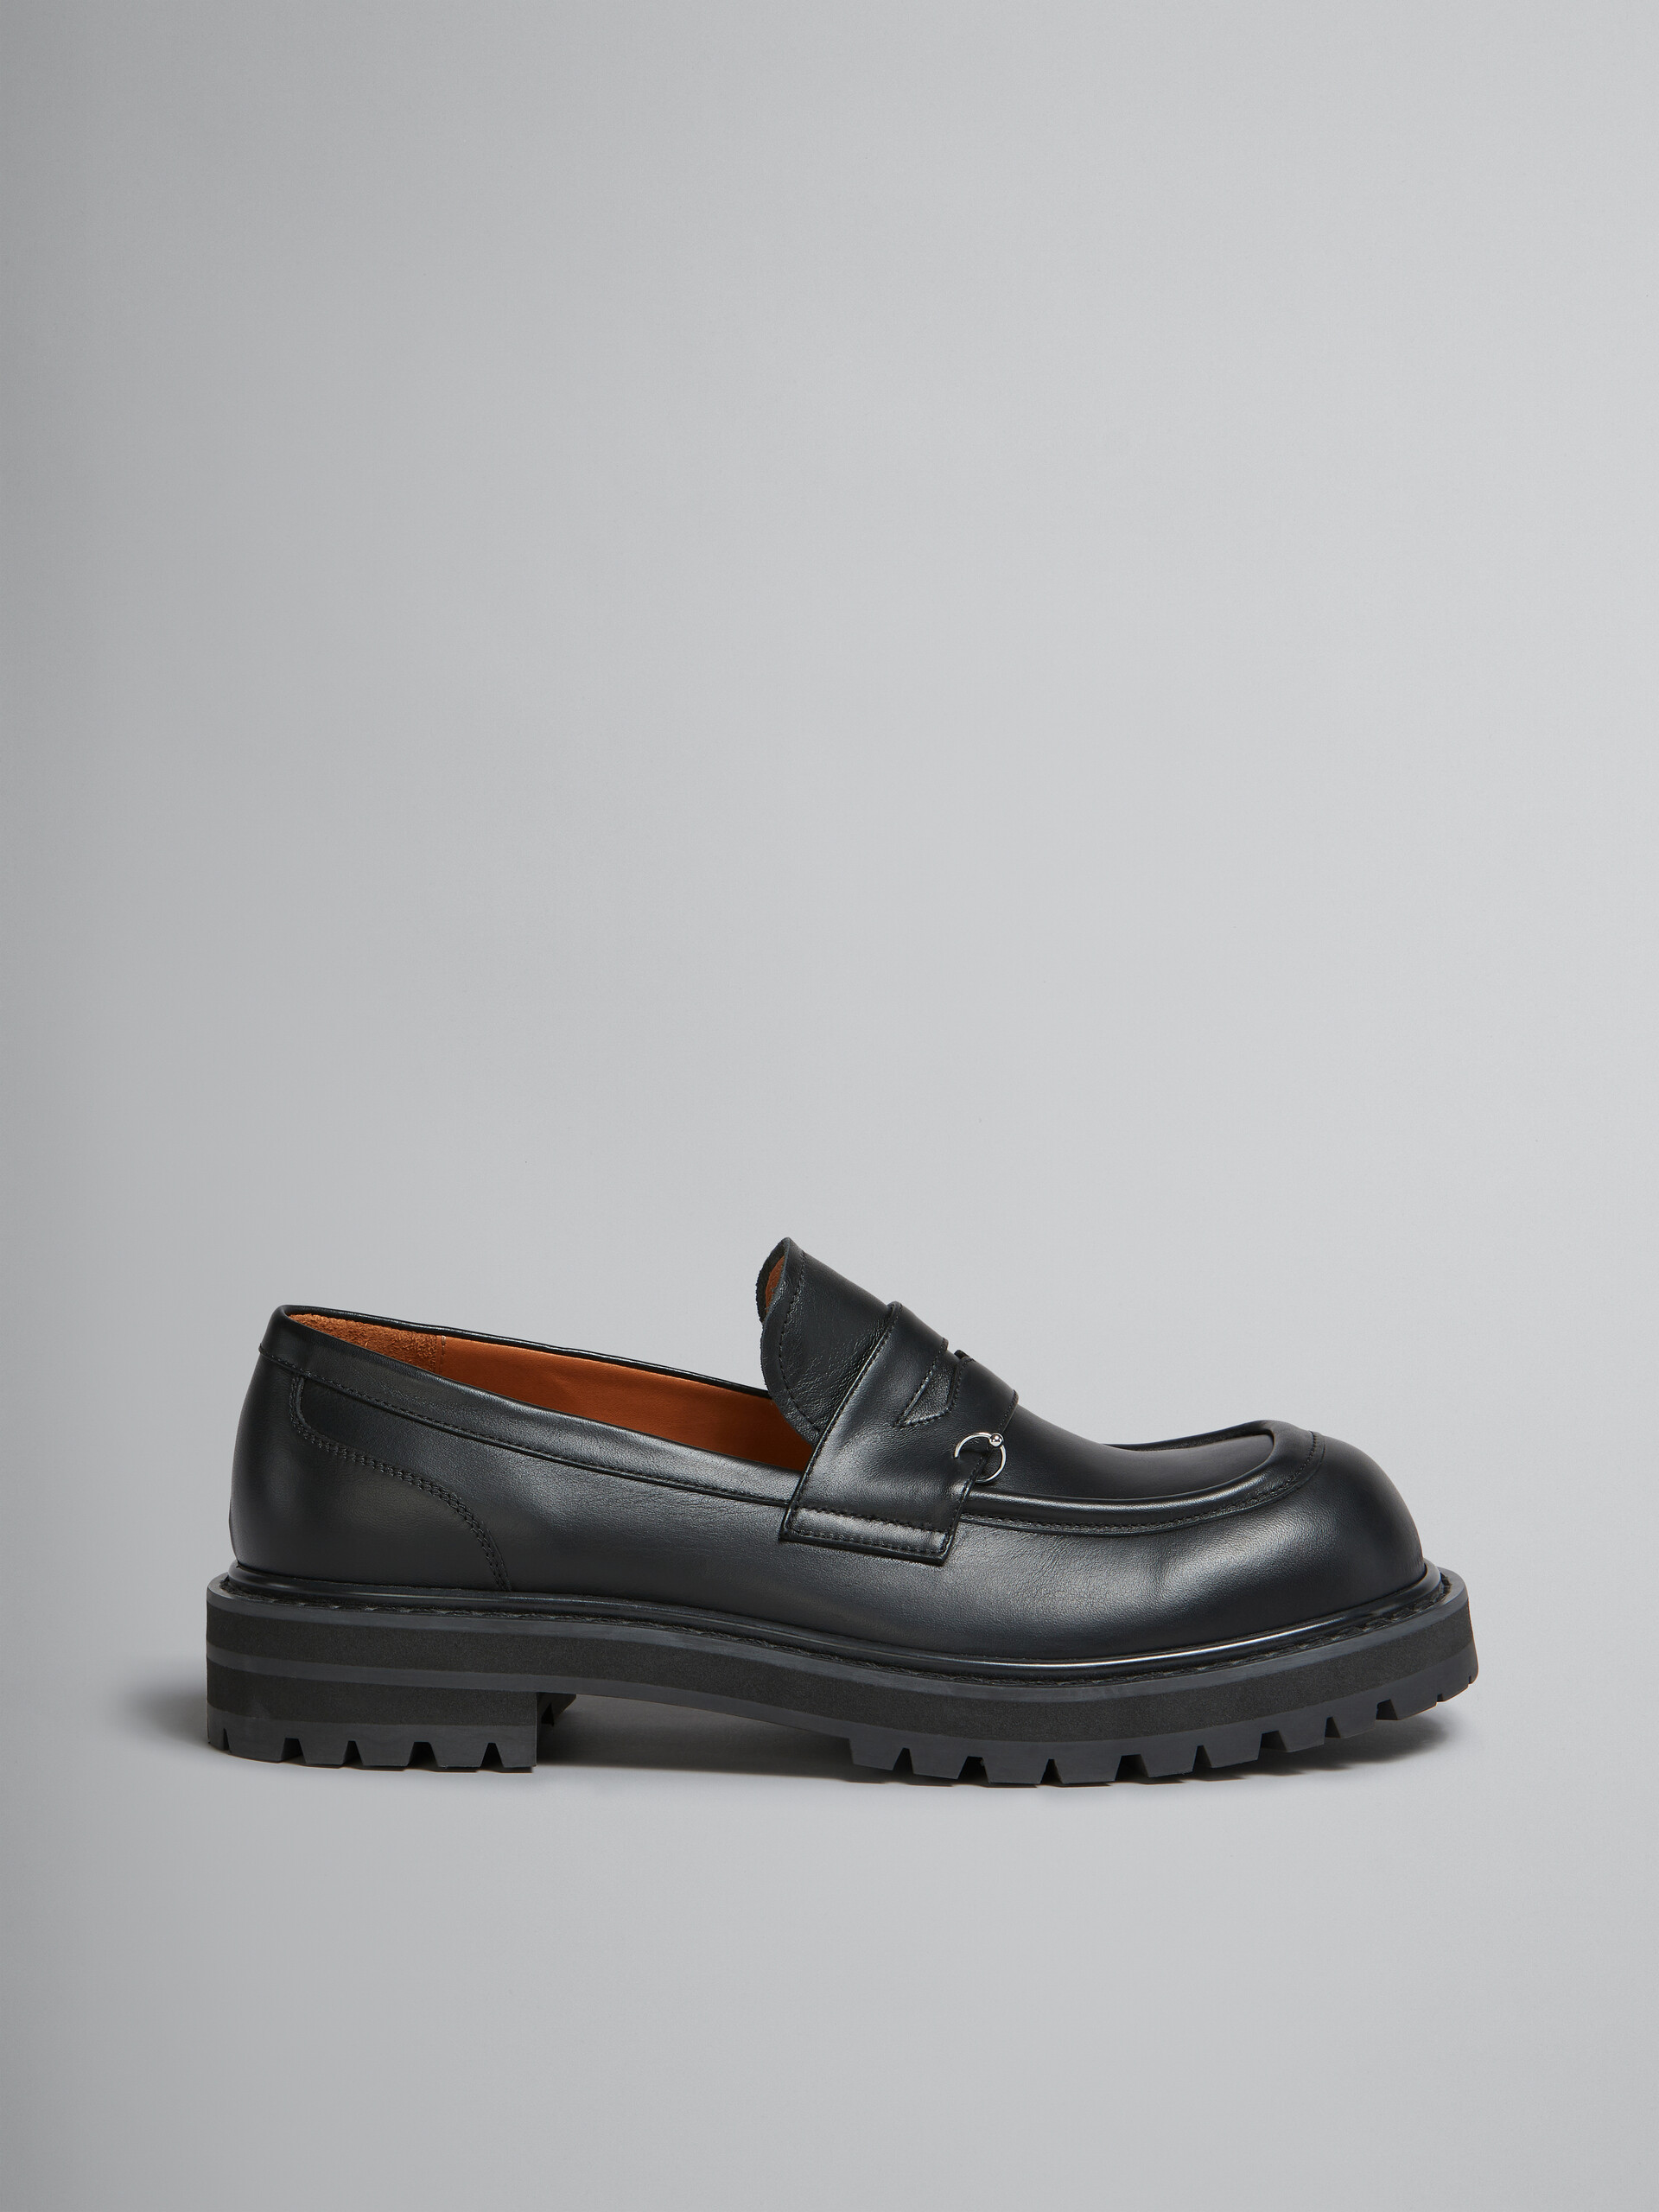 Black leather chunky loafer with piercings - Mocassin - Image 1